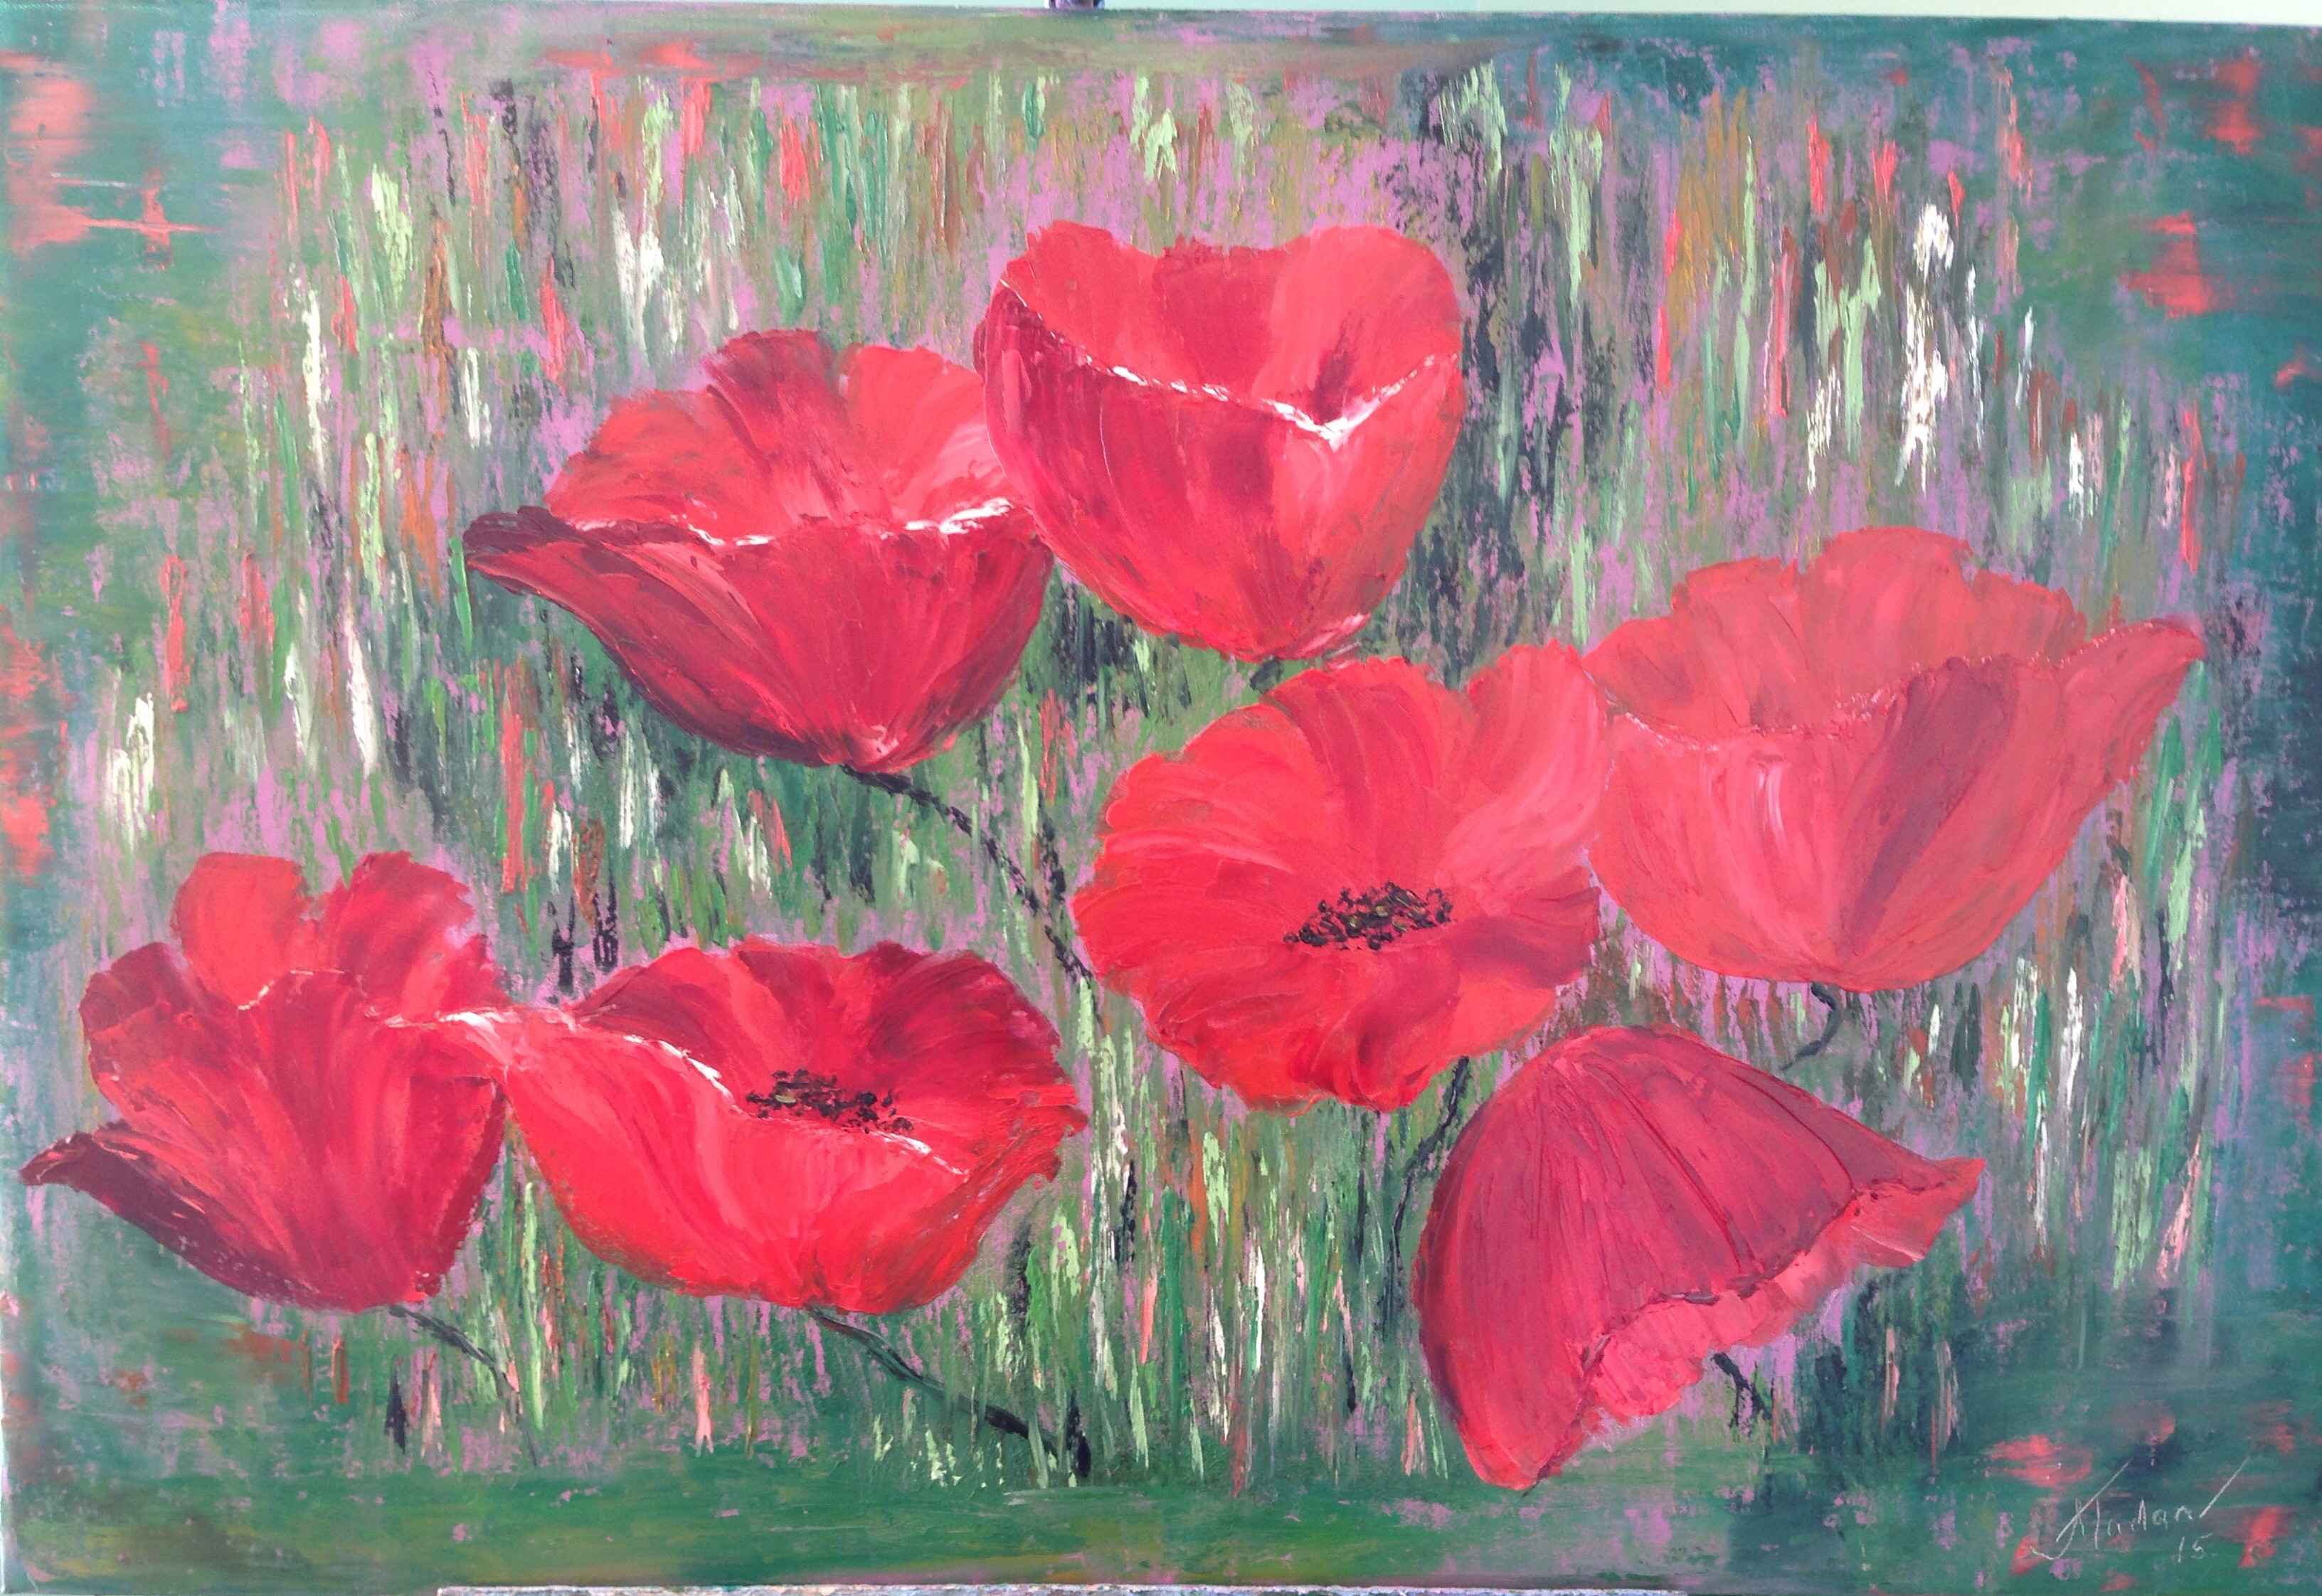 Poppies in the grass II my version